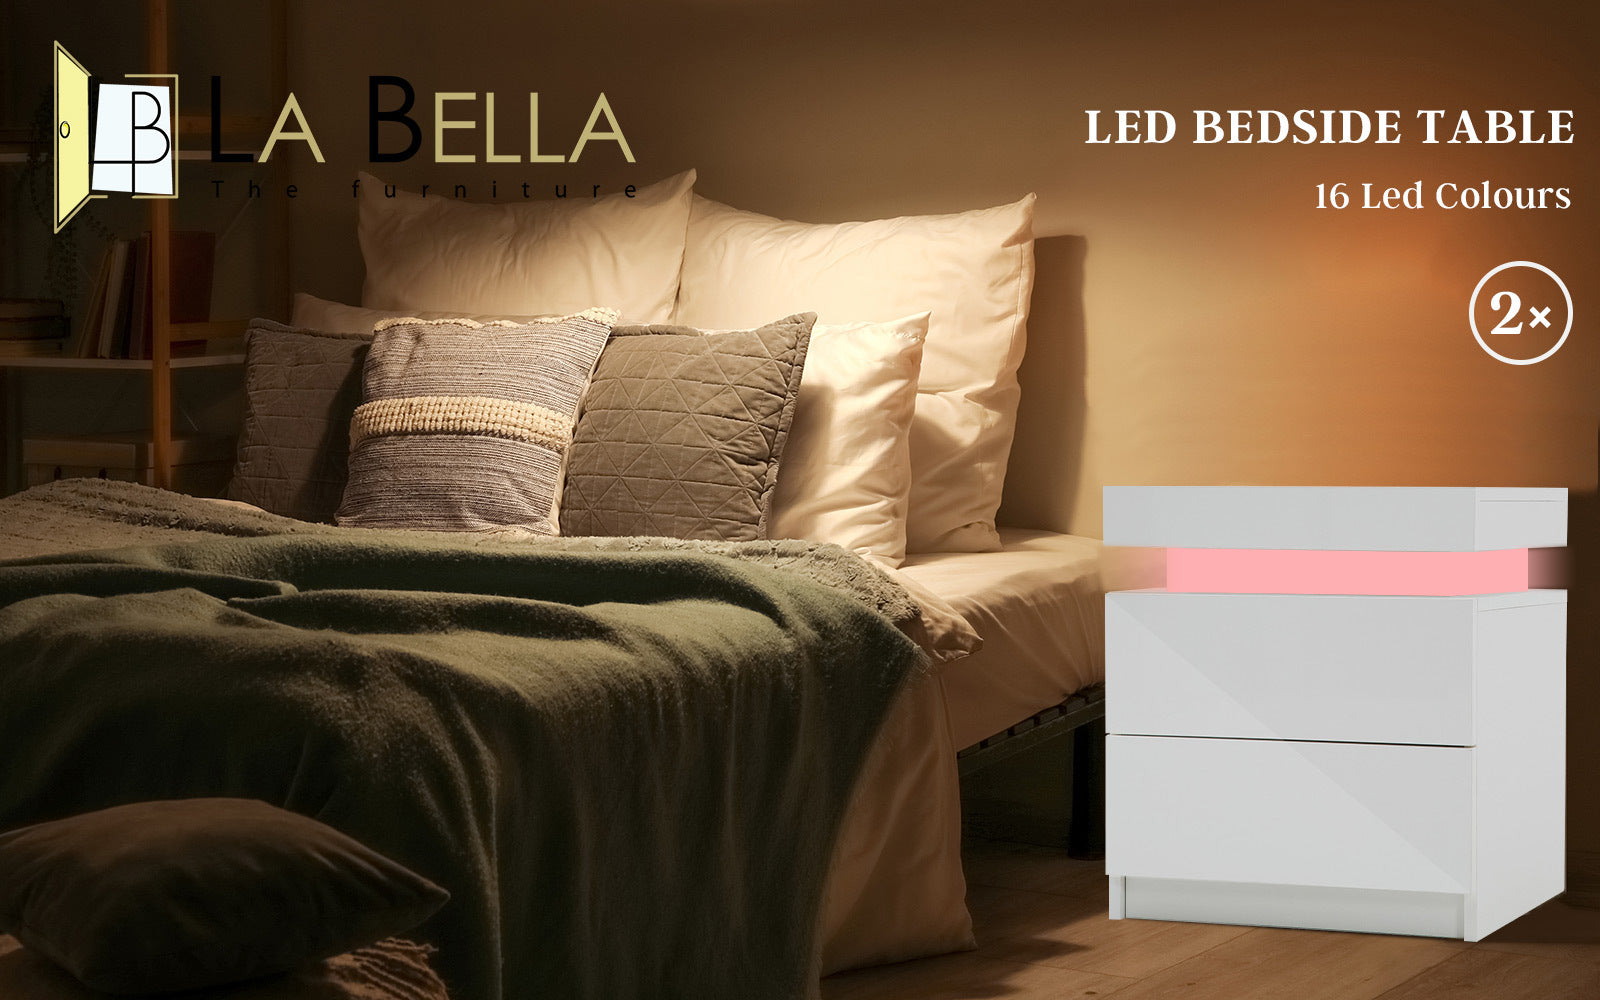 2X Bedside Table 2 Drawers RGB LED Bedroom Cabinet Nightstand Gloss AURORA WHITE - 0